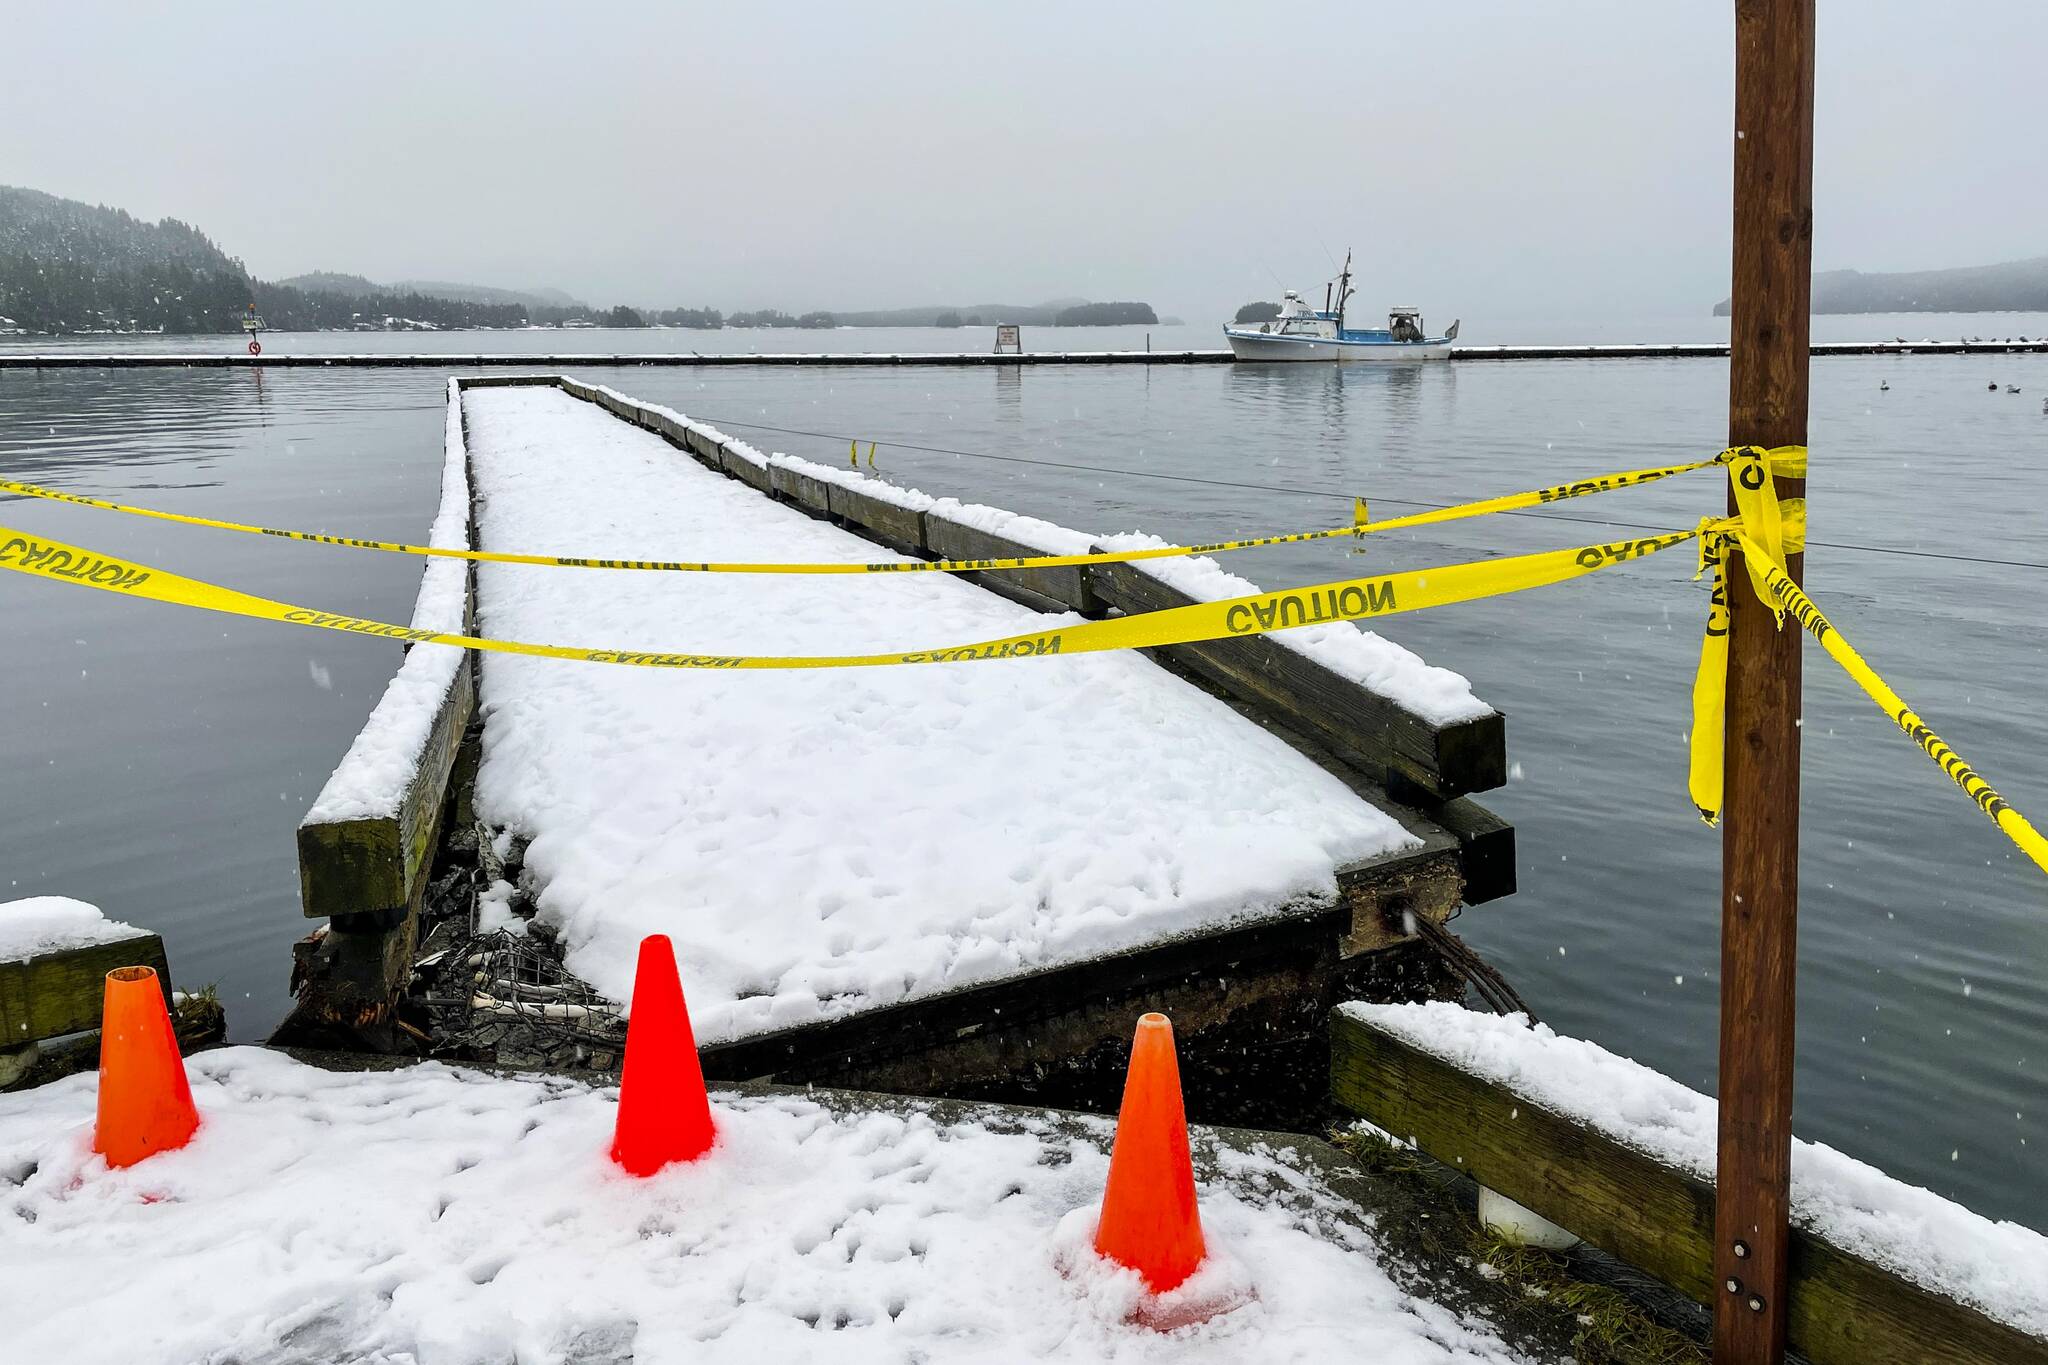 High winds in the early morning of Nov. 26, 2021 damaged two sections of float in Don D. Statter Harbor. (Michael S. Lockett / Juneau Empire)